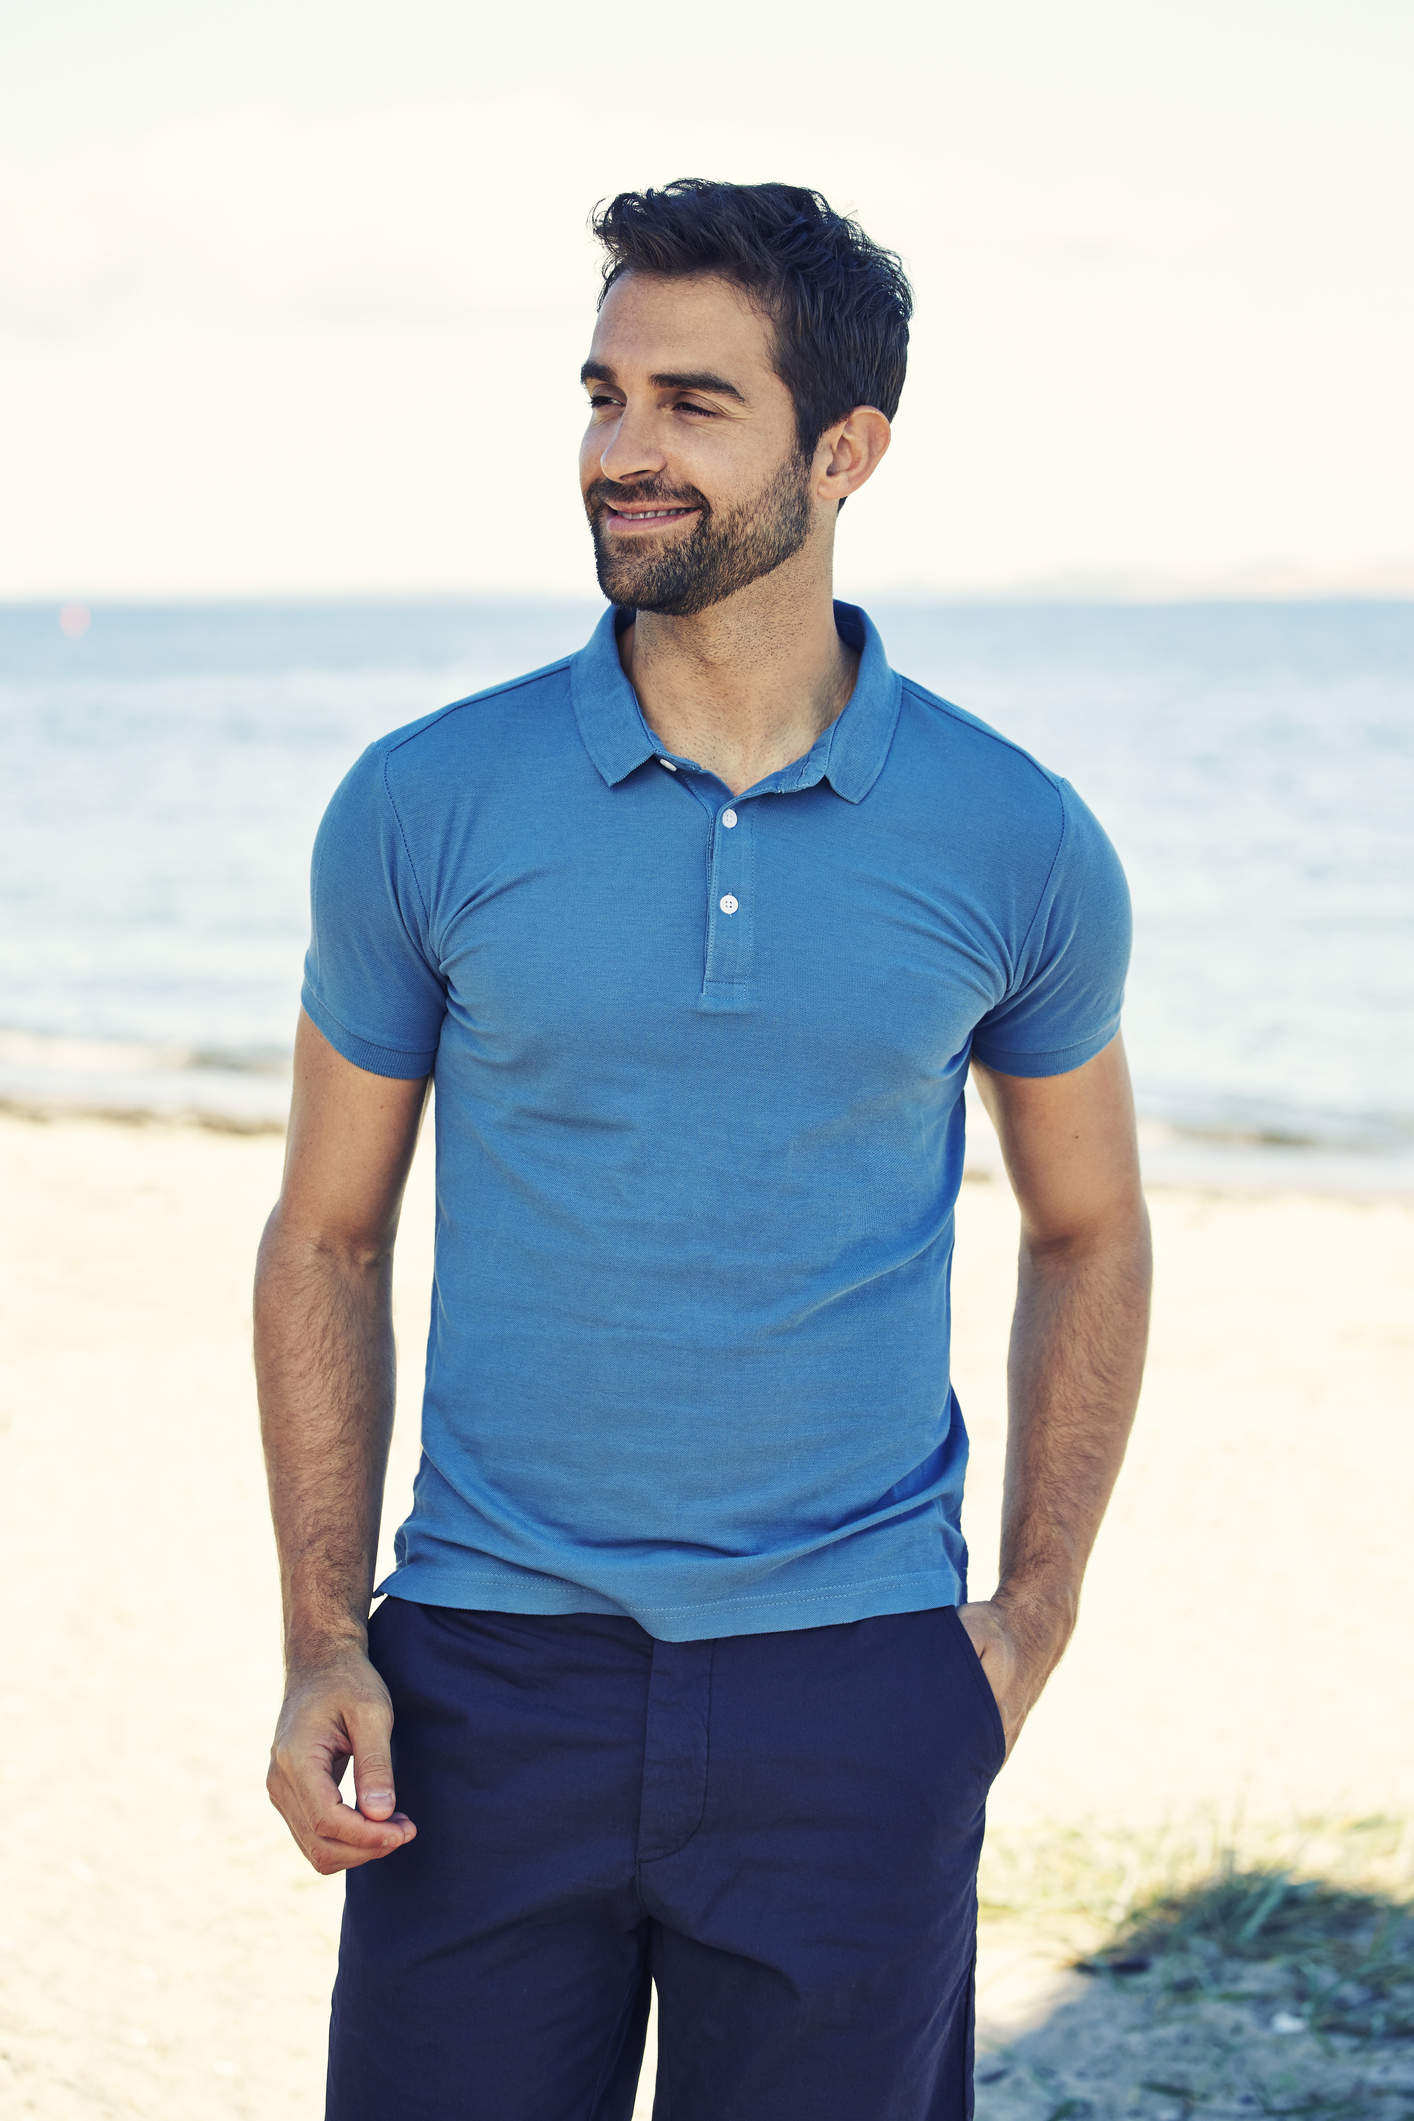 Facelift and Neck Lift for Men patient model standing on a beach in a blue shirt